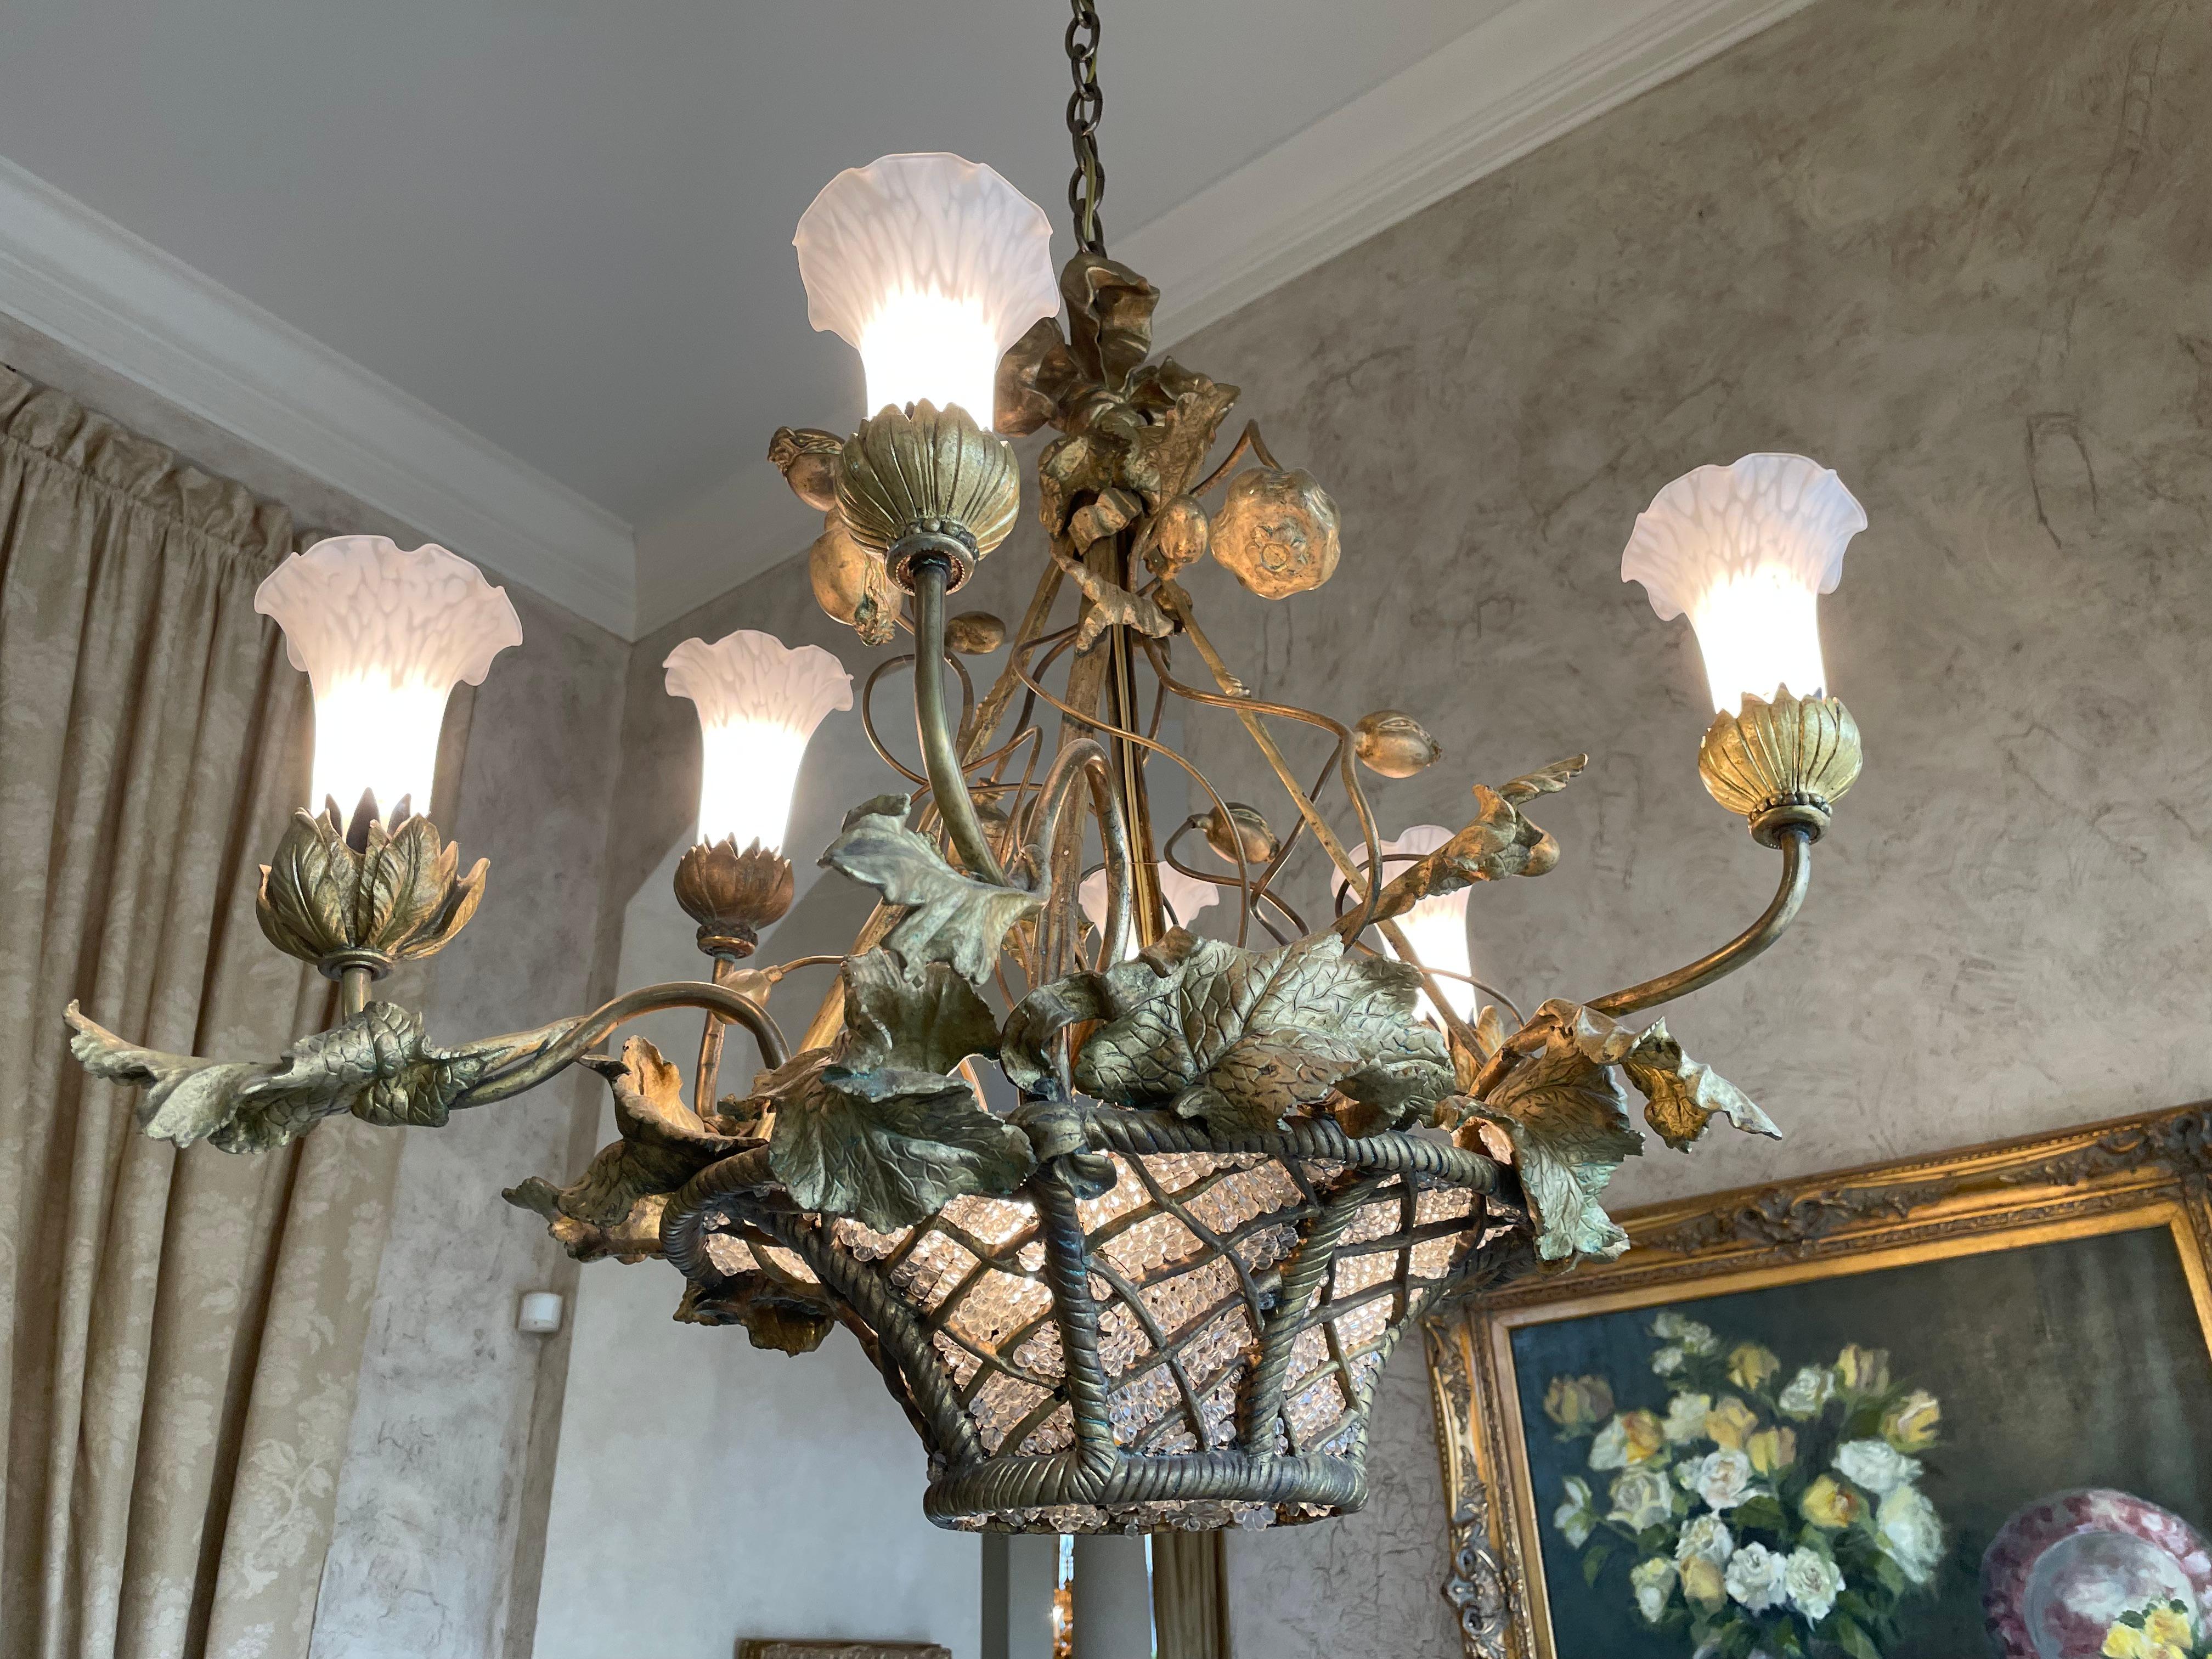 
Napoleon III Style Metal & Glass Bead Basket Six-Light Chandelier 
The metal basket-form frame set with glass beads, supporting upward set arms fitted with white floral-shaped glass shades. 
Height 28 in. (71.12 cm.), Width 30 in. (76.2 cm.), Depth